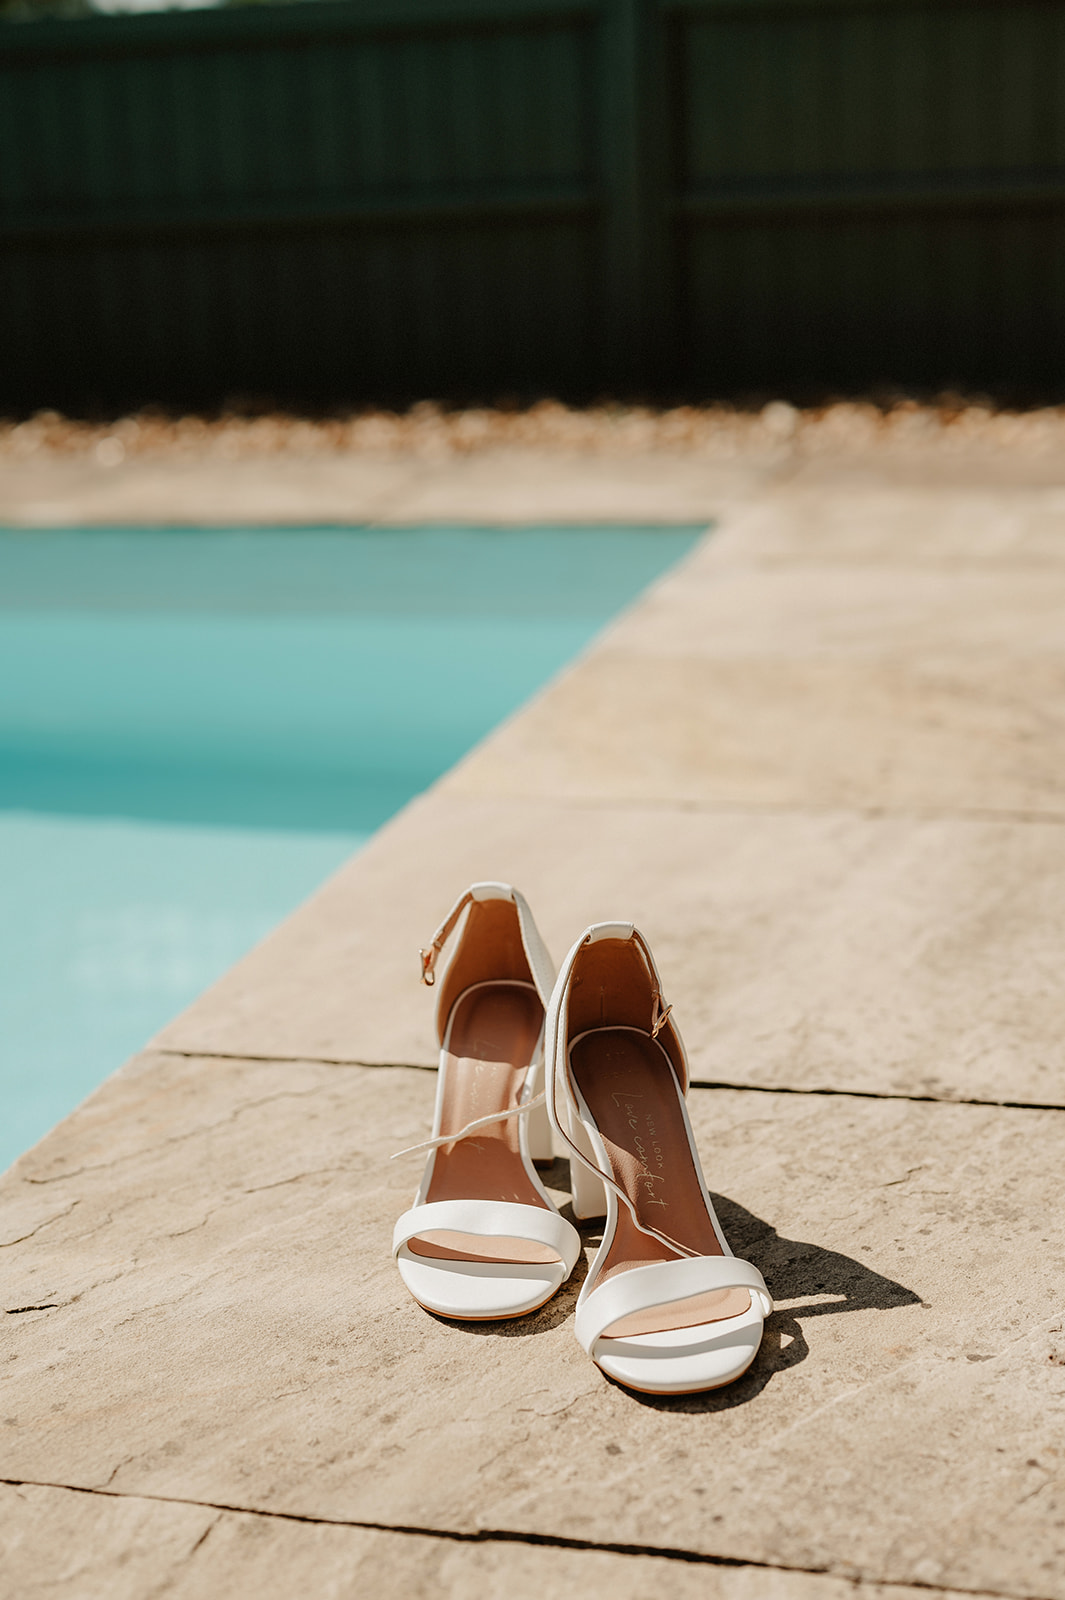 photo at villiers barn of white wedding shoes outside on paving by the swimming pool